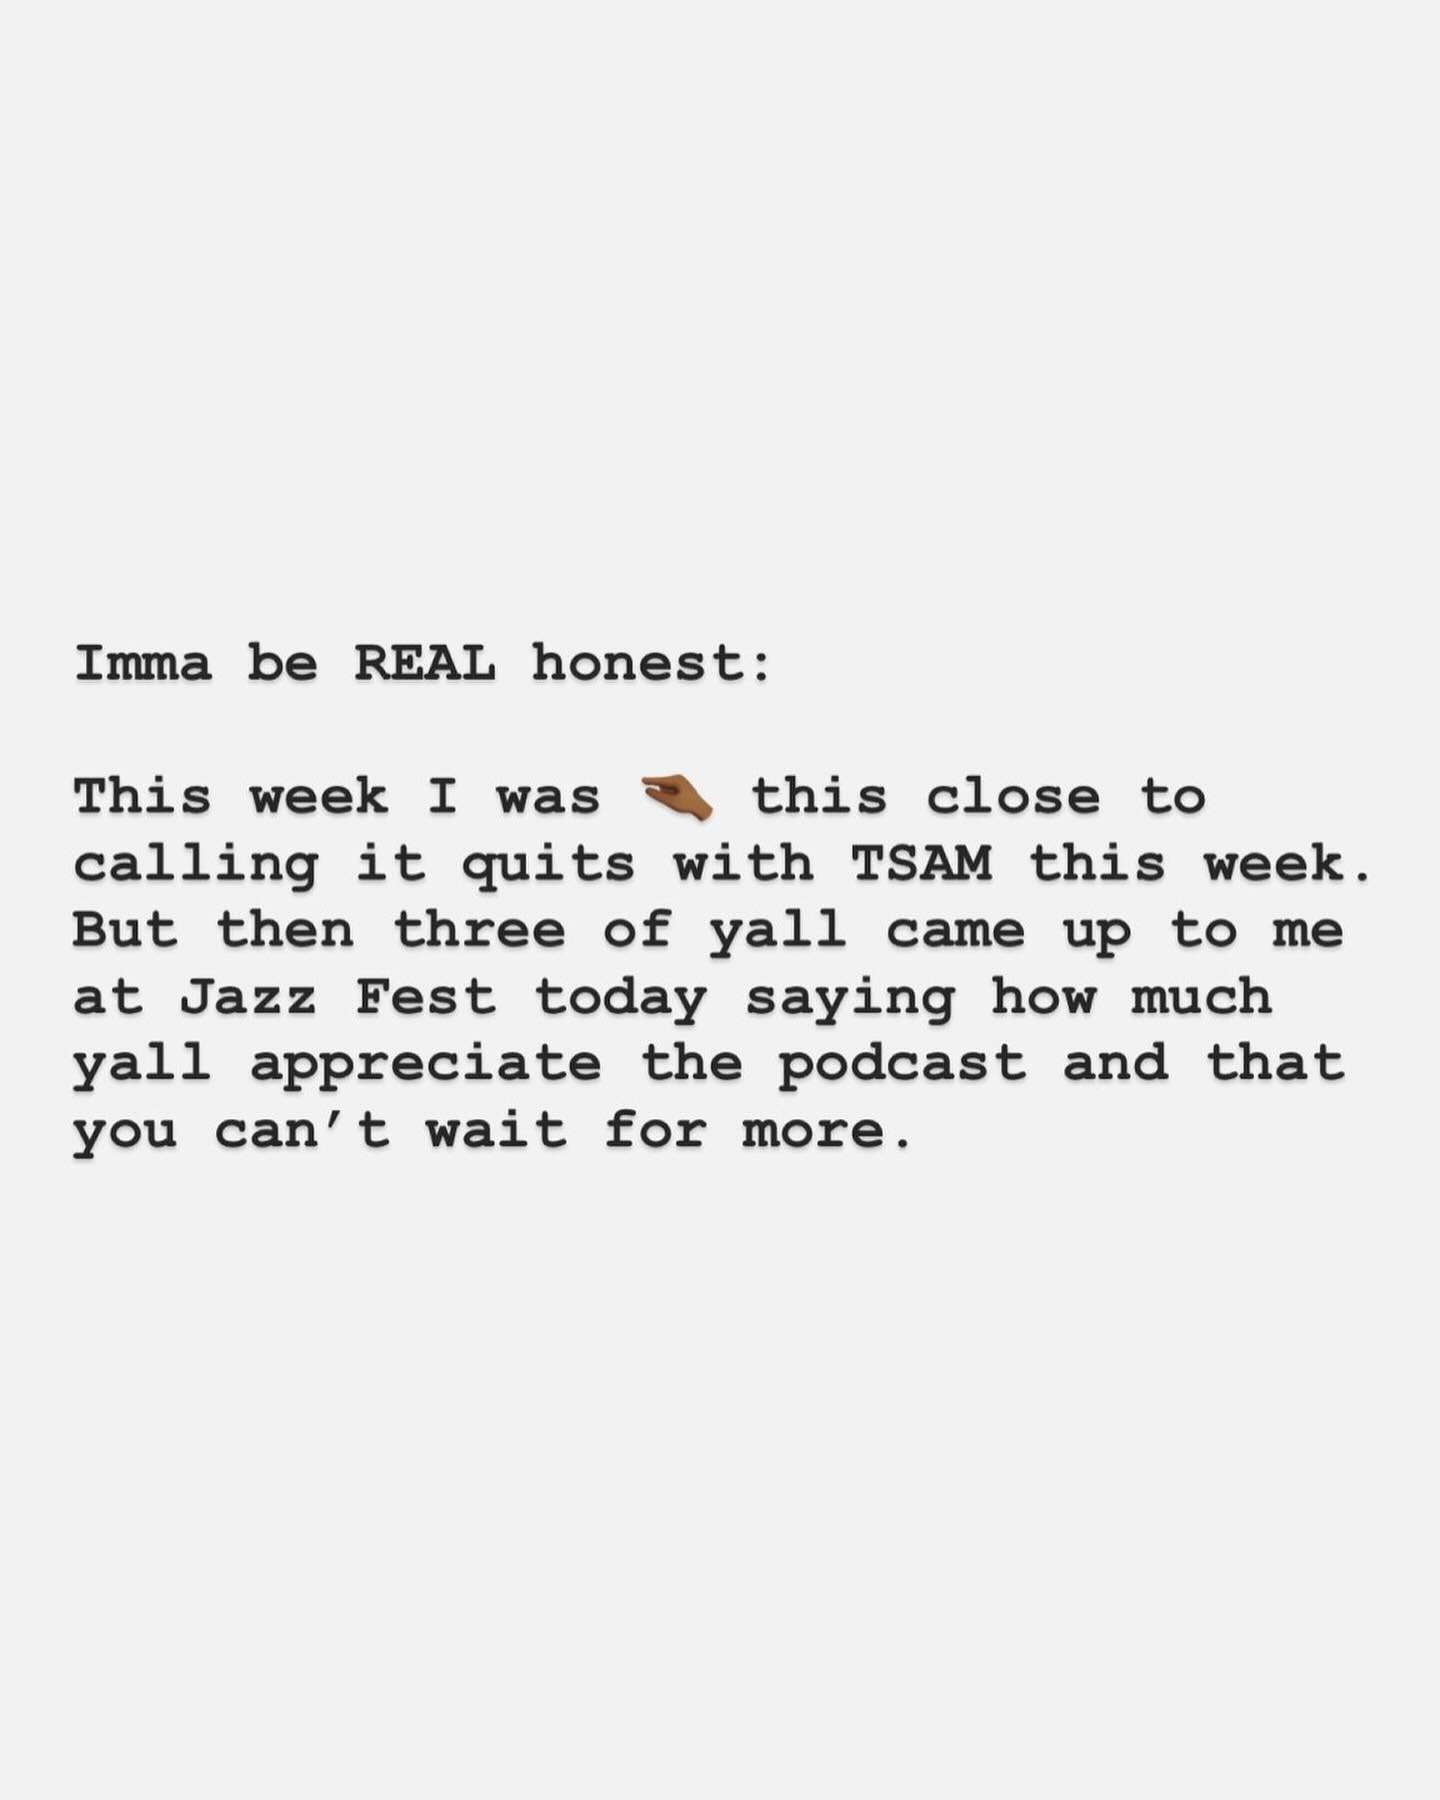 I was really close to calling it quits with TSAM a few days ago&hellip;

But then three of yall came up to me at Jazz Fest this weekend saying how much yall appreciate the podcast and that you can&rsquo;t wait for more.

The reality is: I still have 